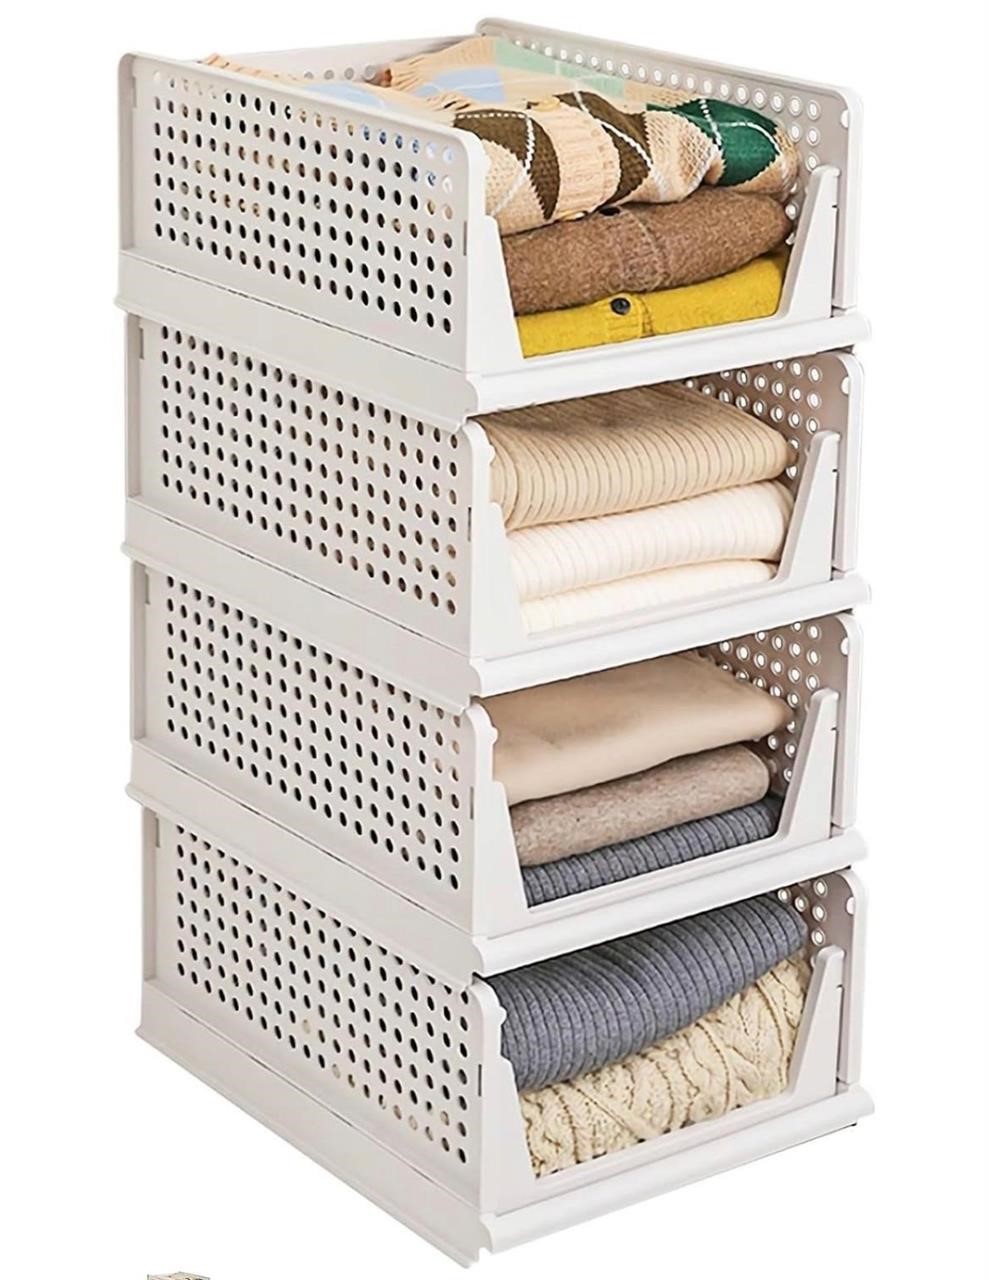 NEW $56 (16.9") 4-Pack Clothes Drawer Organizer